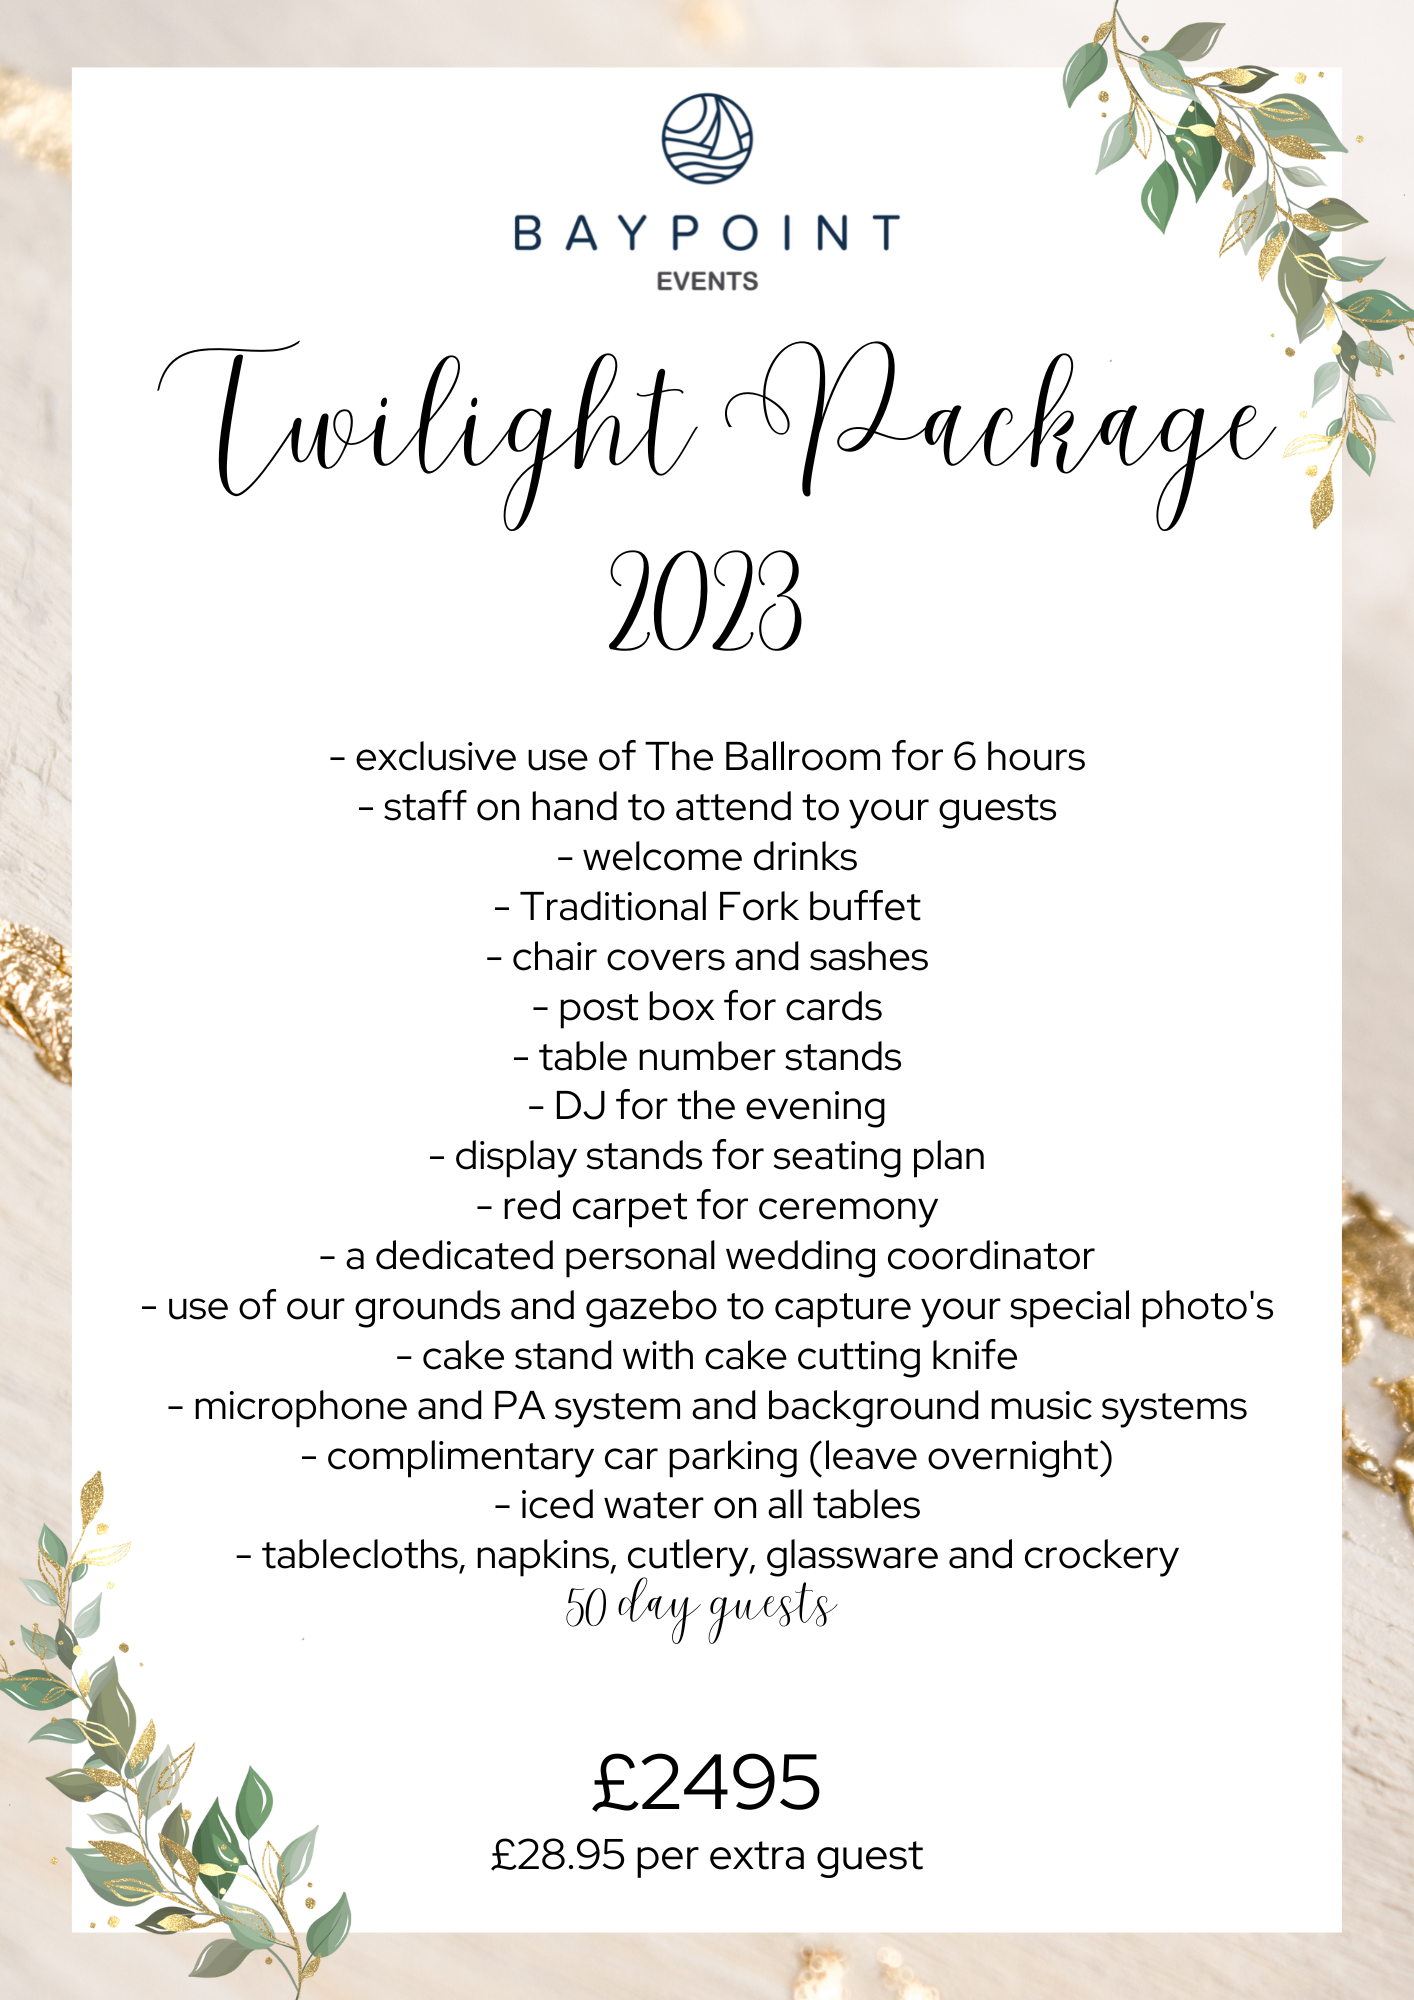 Twilight wedding package by Baypoint